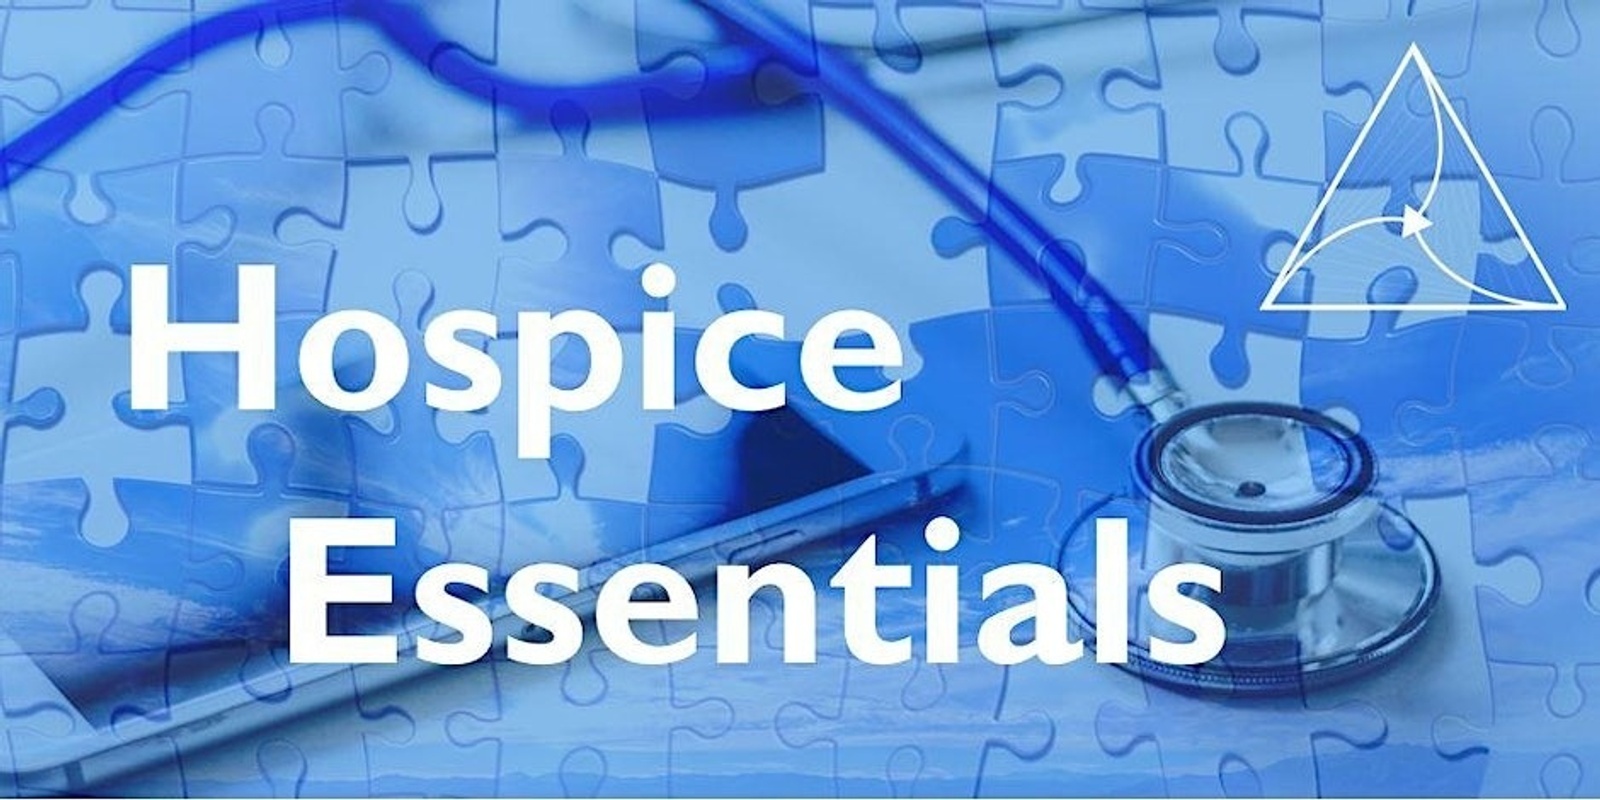 Banner image for Hospice Essentials